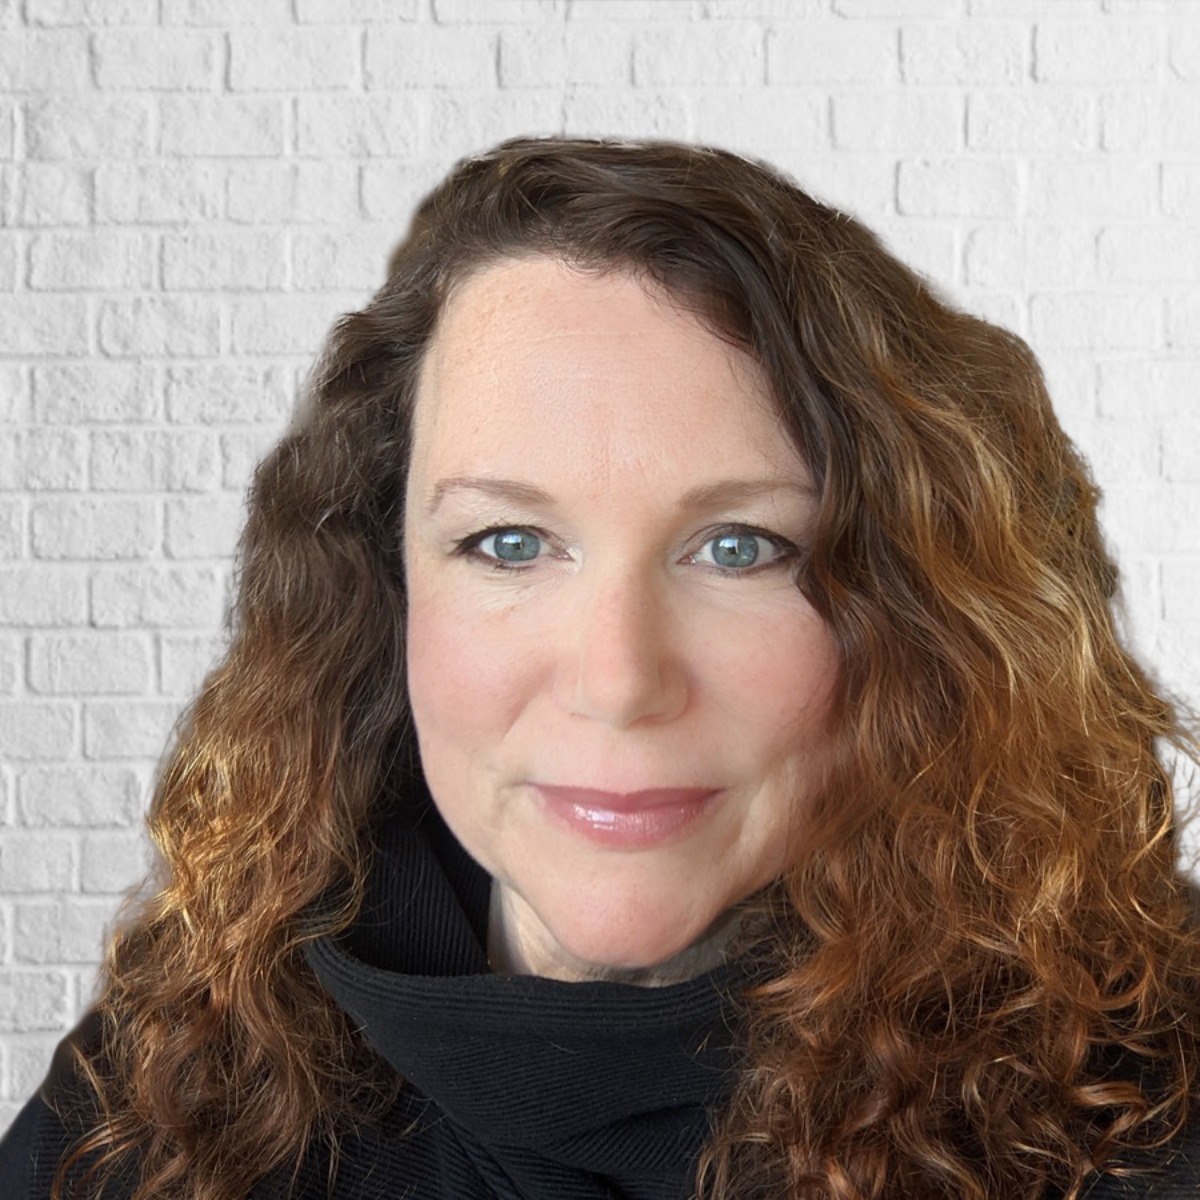 Rhonda O'Keefe, Vice President of Intellectual Property and Contracts at NGen Canada